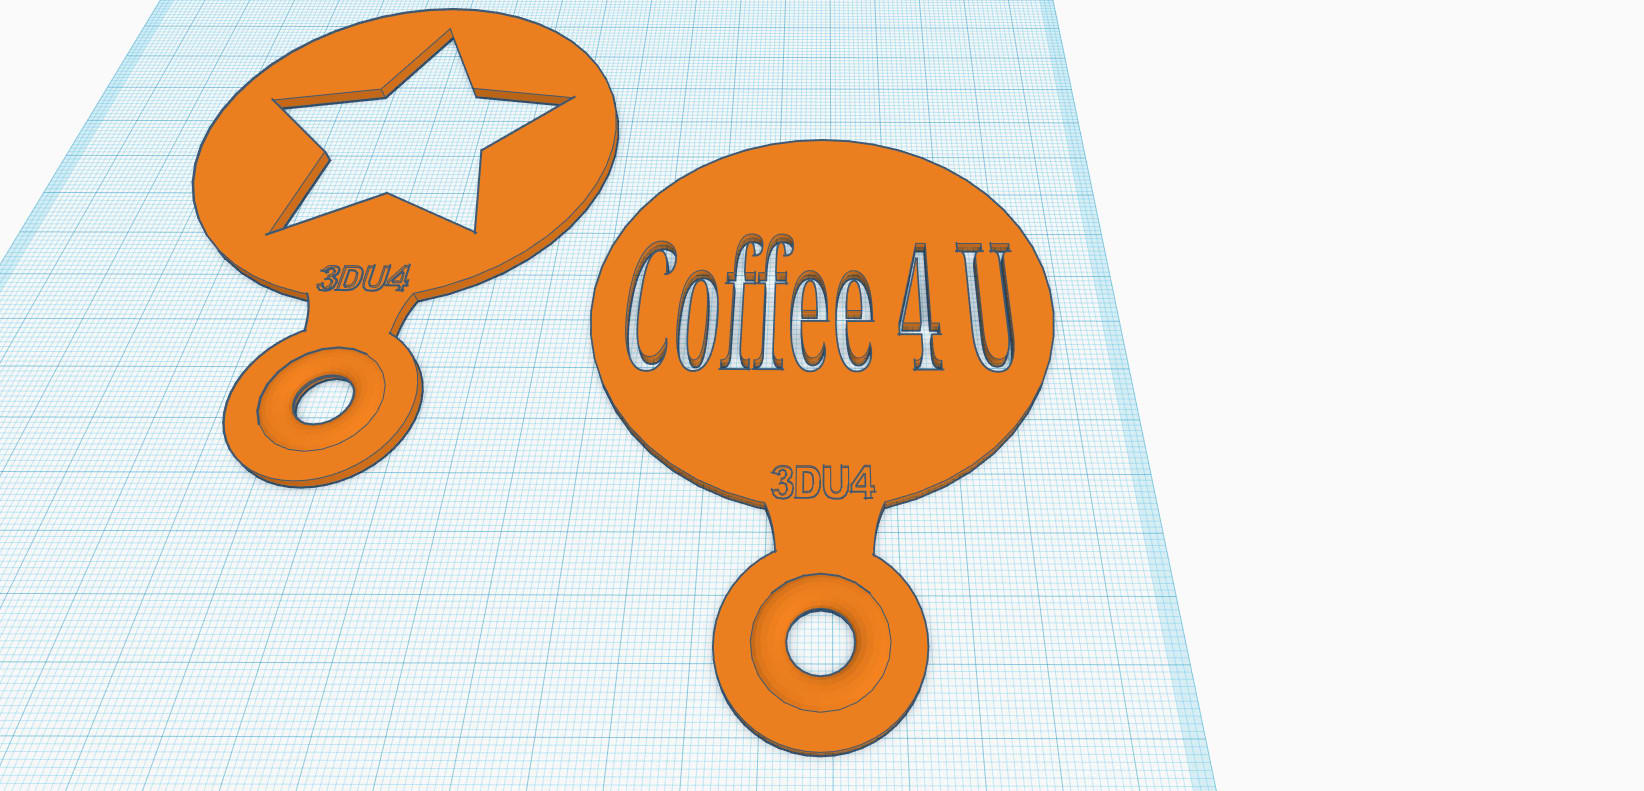 Download Convert Line Art To Vector Svg Or Stl For 3d Printing By Isepic Fiverr